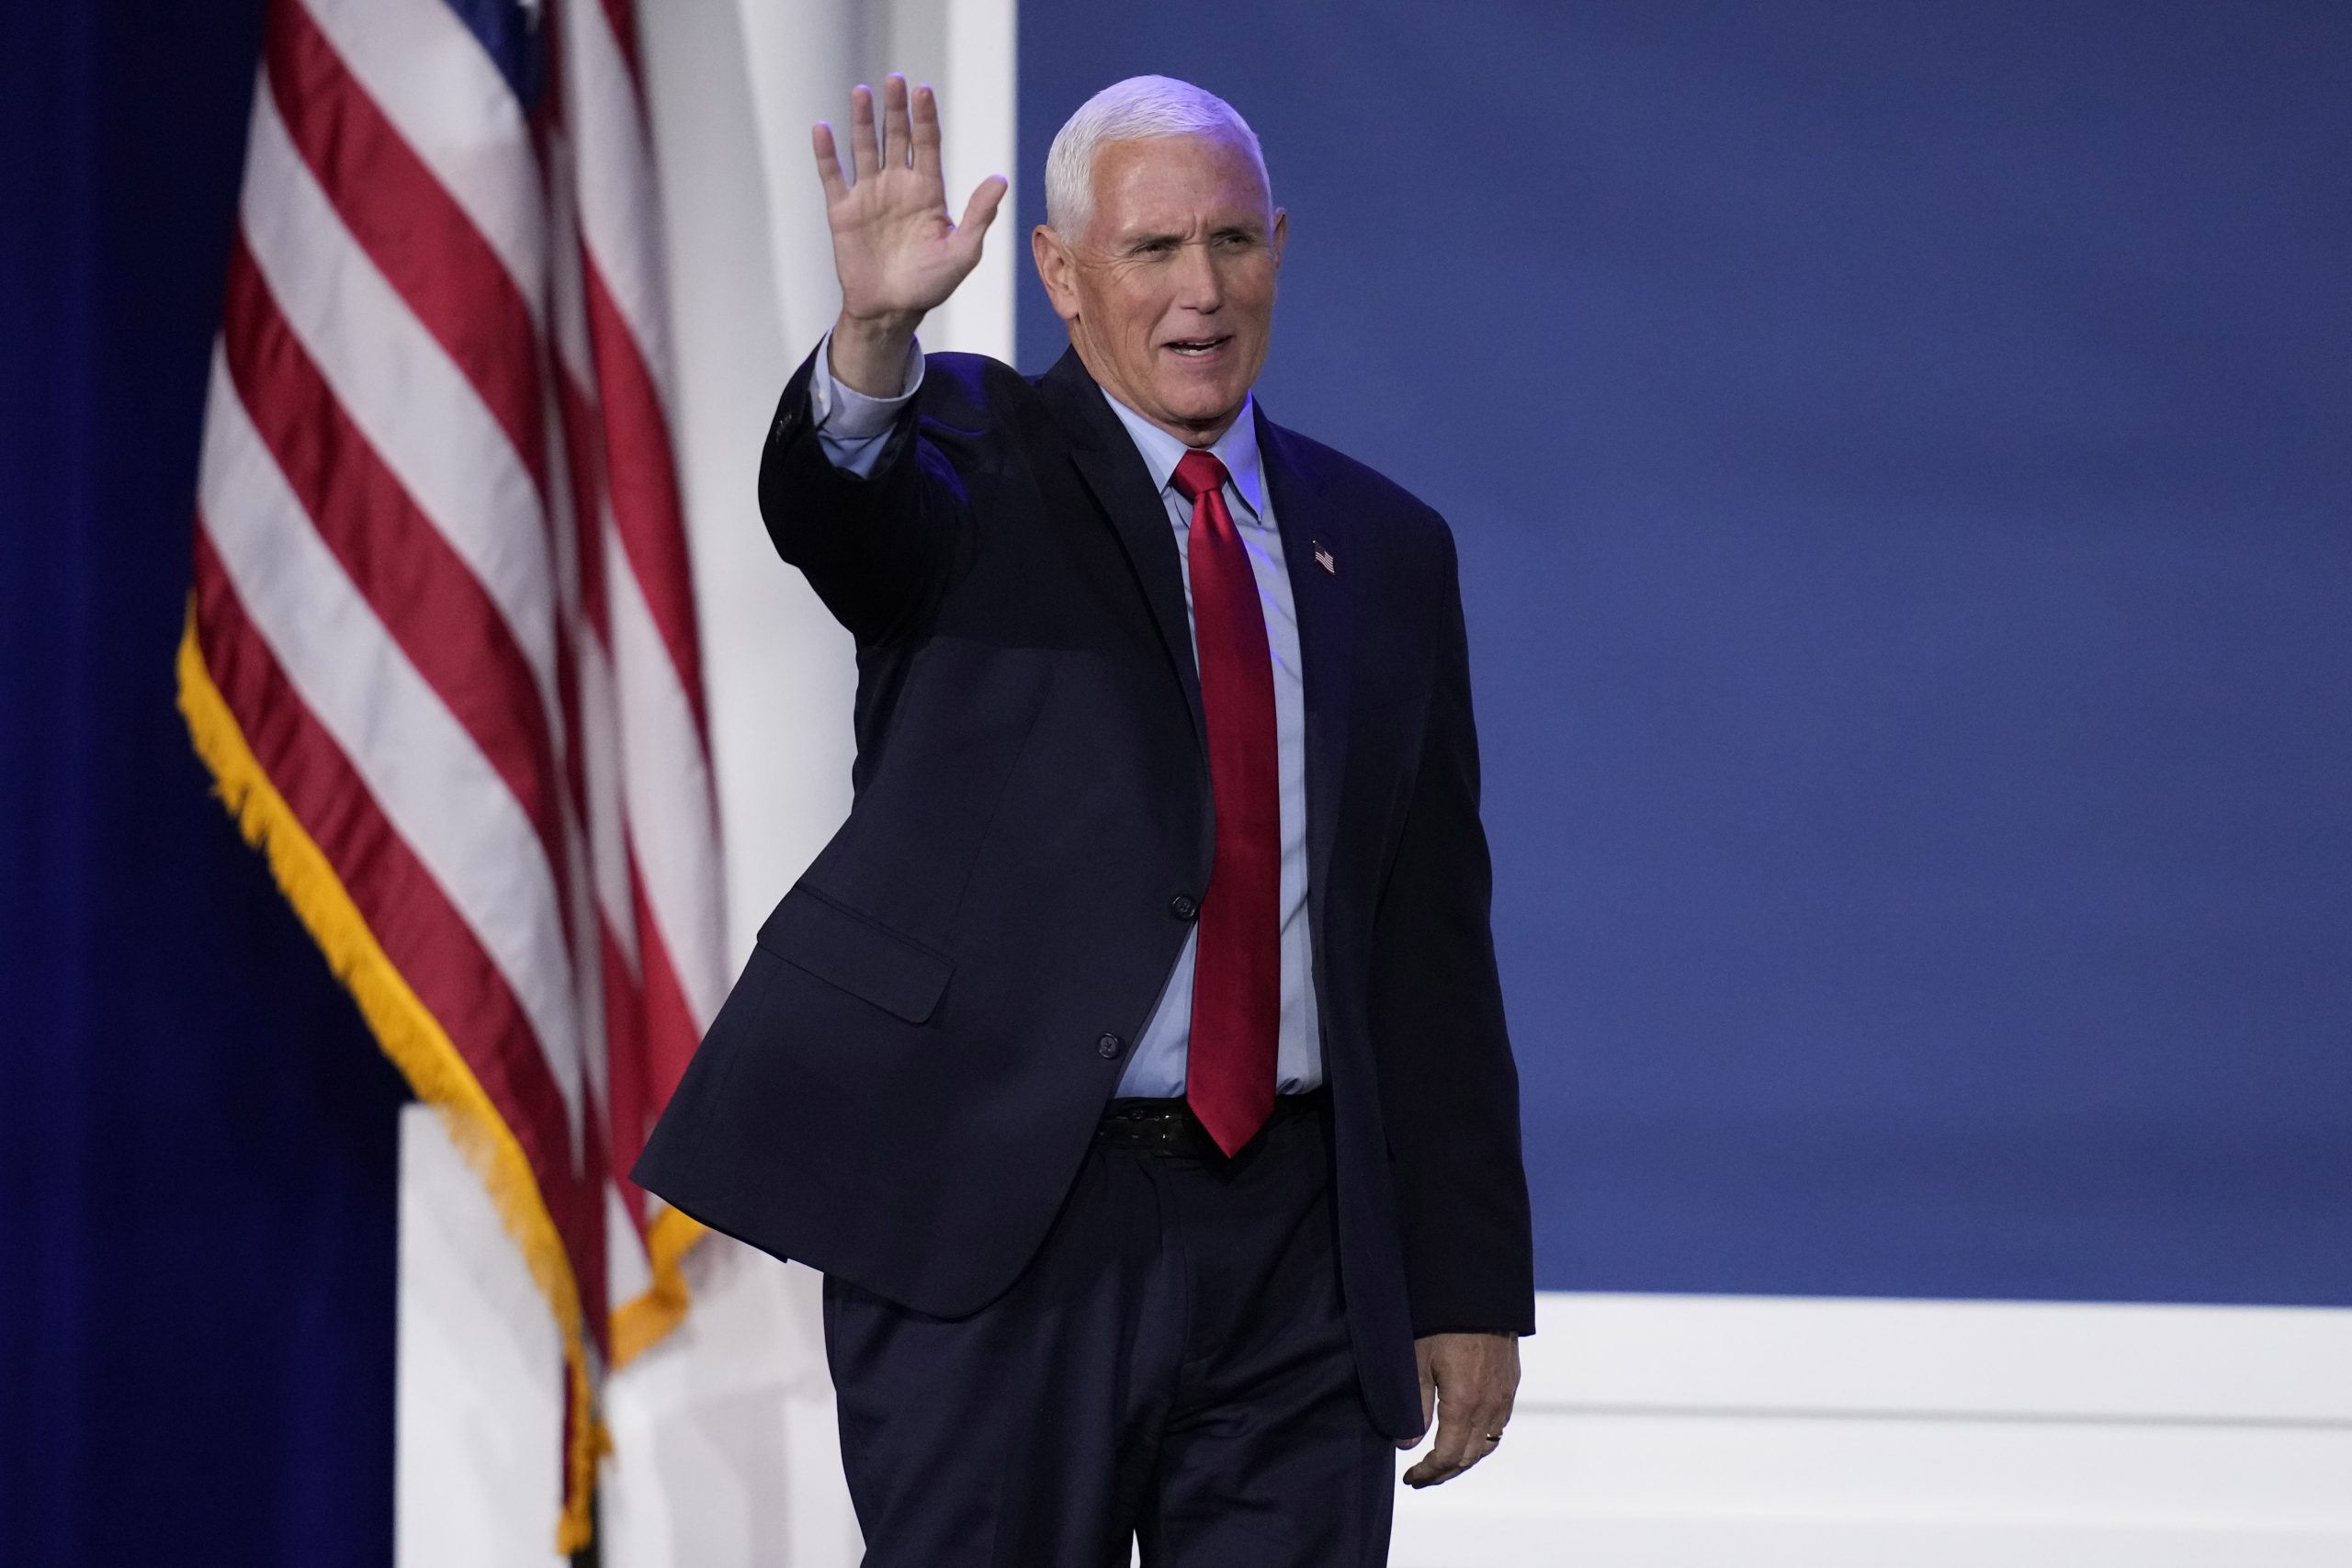 Pence commends leaders of both parties for Jan. 6 handling